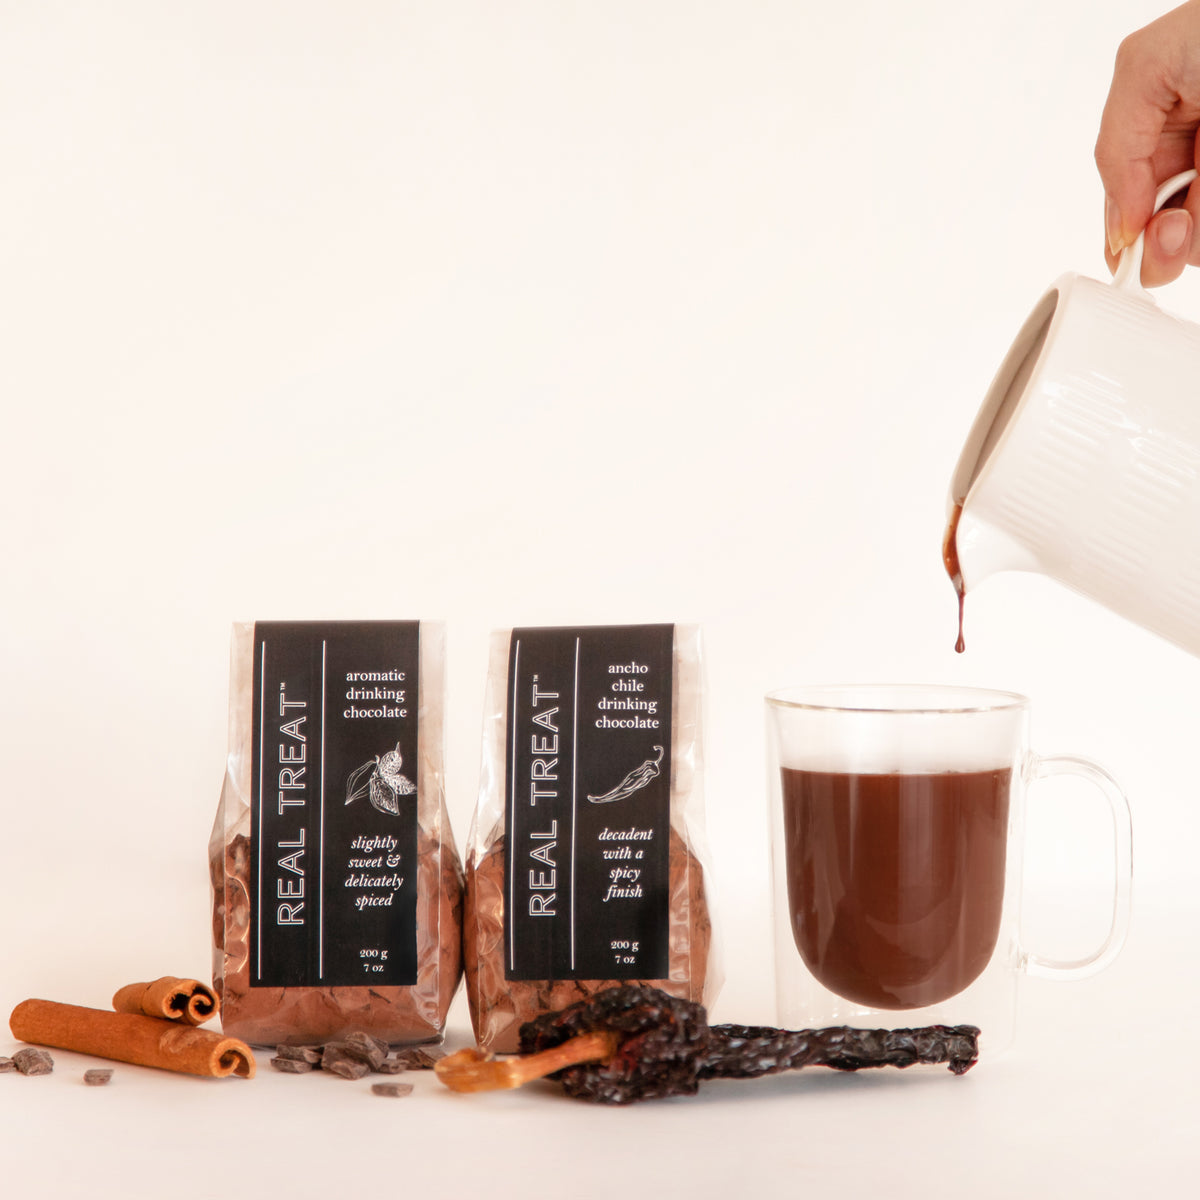 Packages of Ancho Chile Drinking Chocolate and Aromatic Drinking Chocolate  with a clear mug filling with decadent chocolate